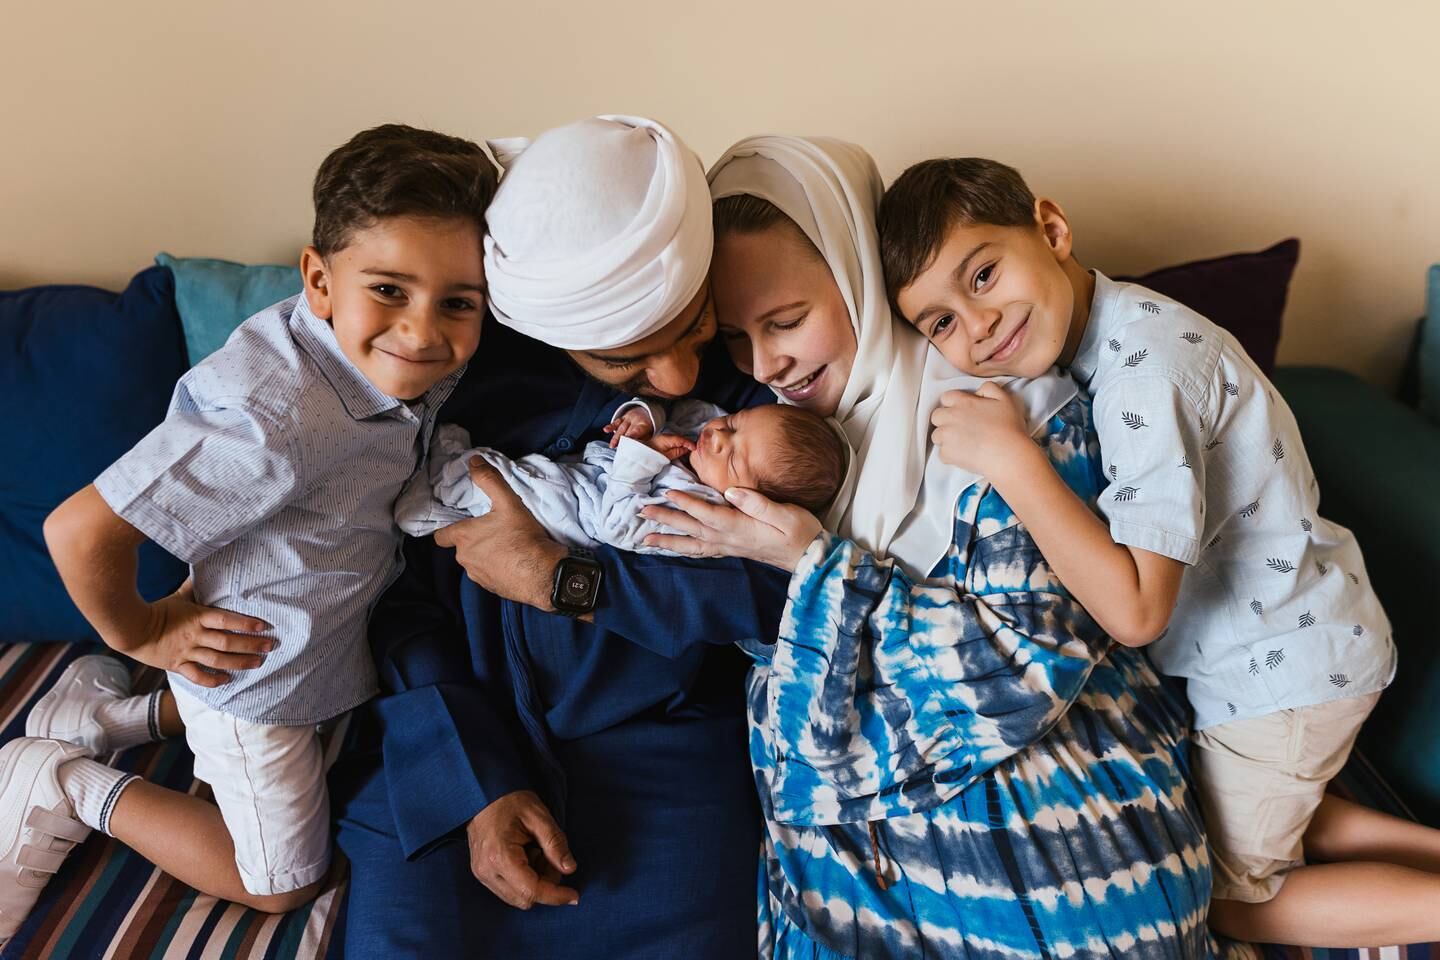 Megan Al Marzooqi started Real Mums UAE to offer all manner of birthing and parenting suggestions and recommendations. Photo: Megan Al Marzooqi